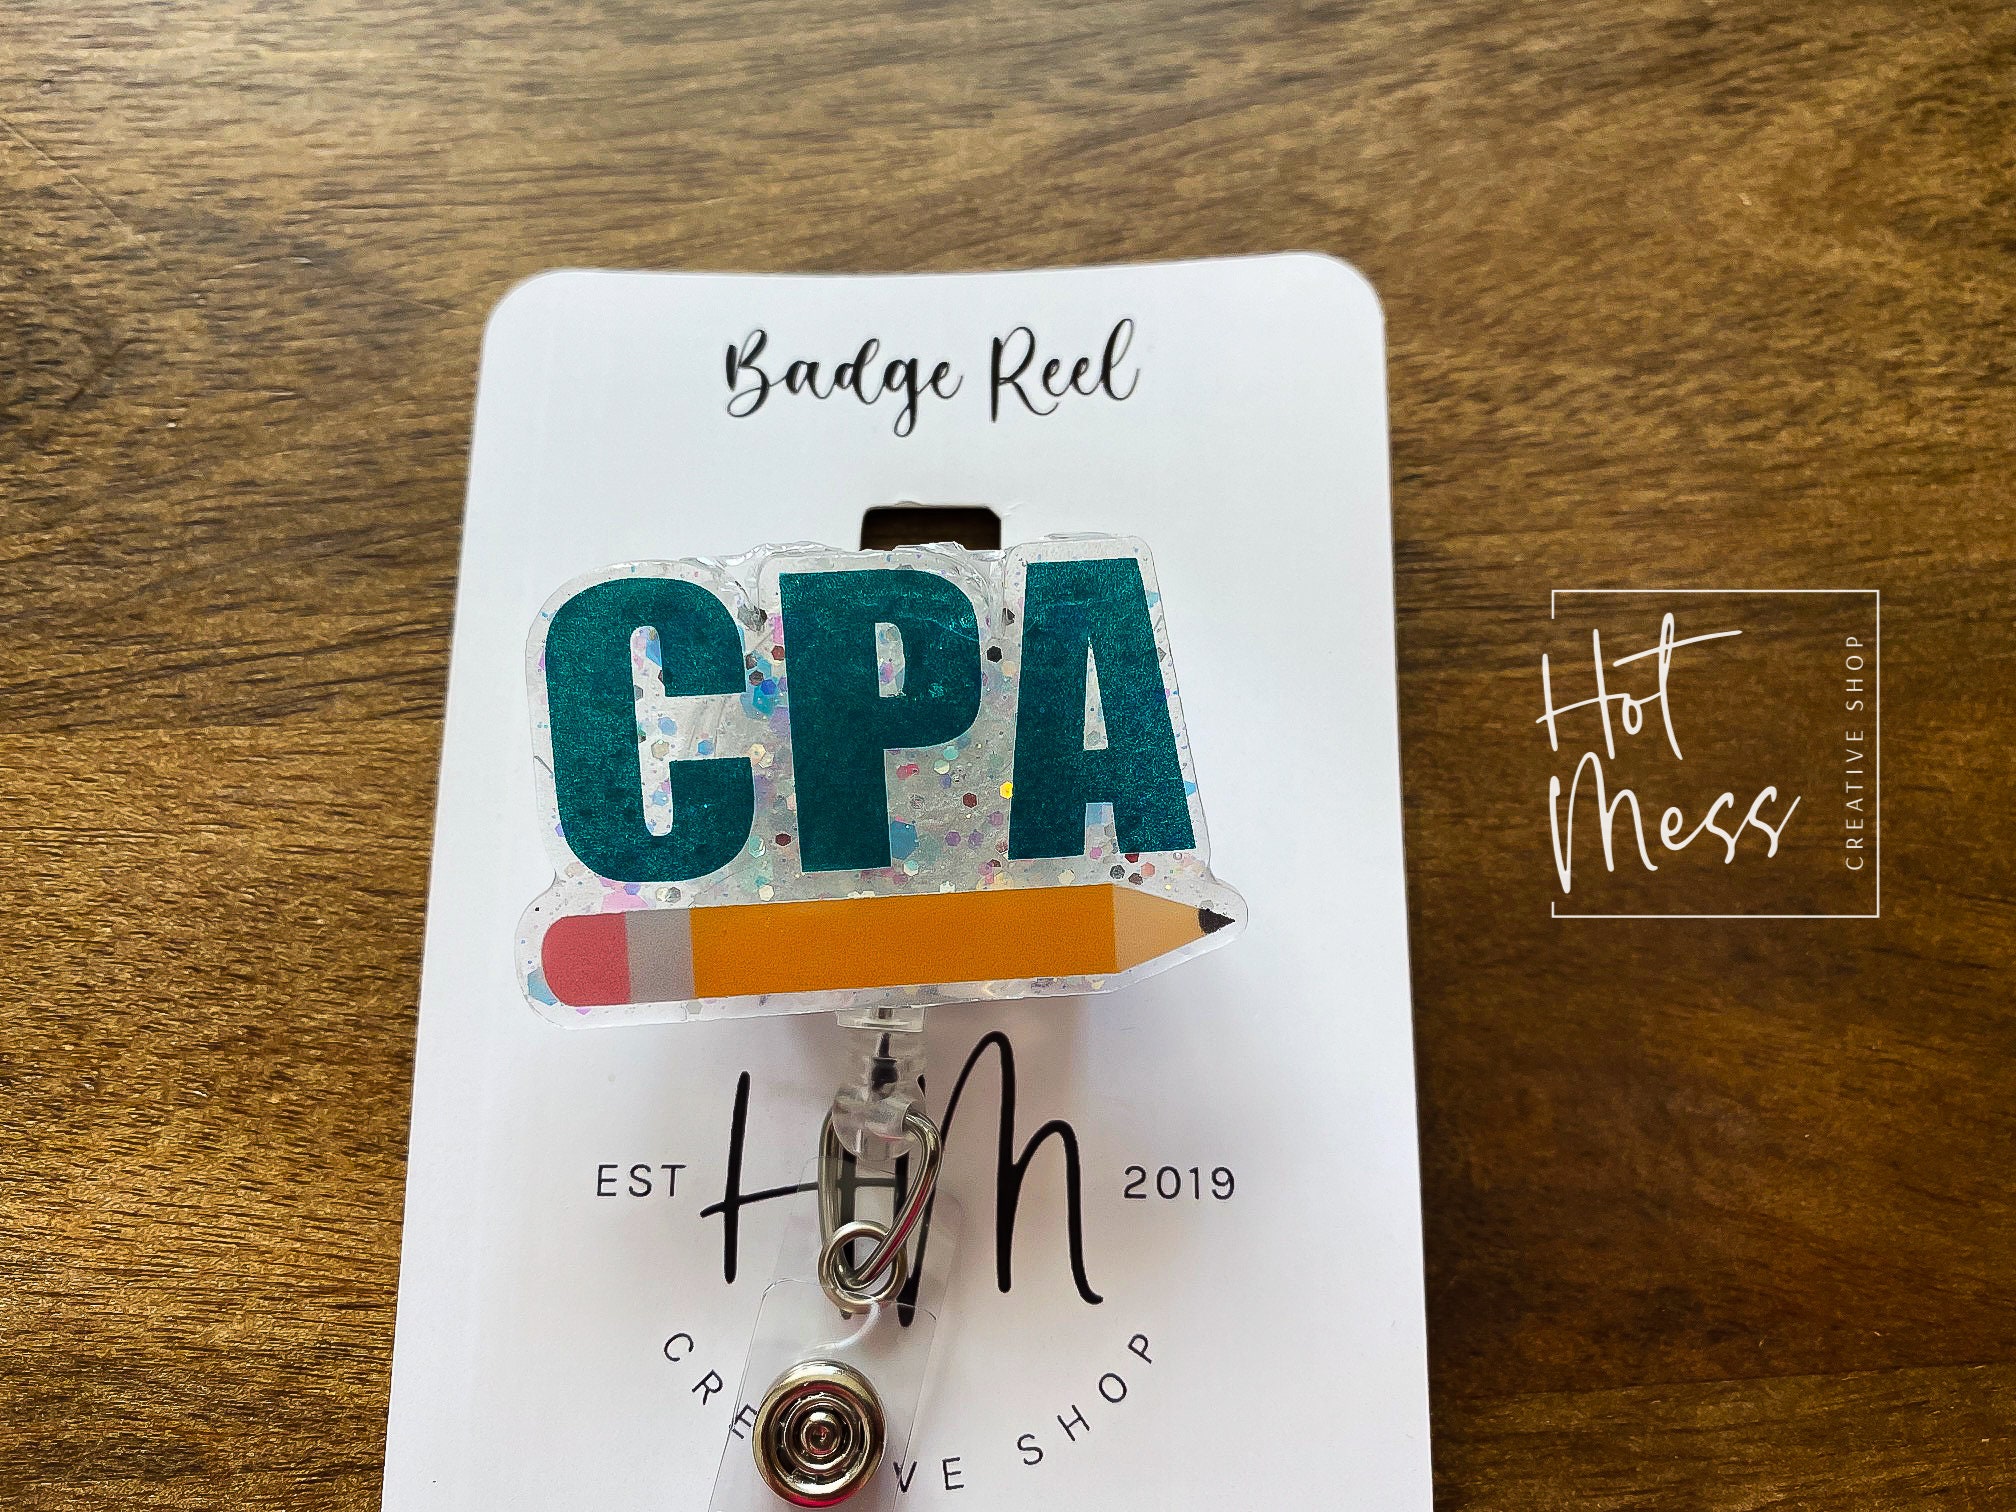 Teal CPA Badge Reel, Accounting ID Holder, Retractable Acrylic Badge Reel, Office work Badge holder, cpa gift